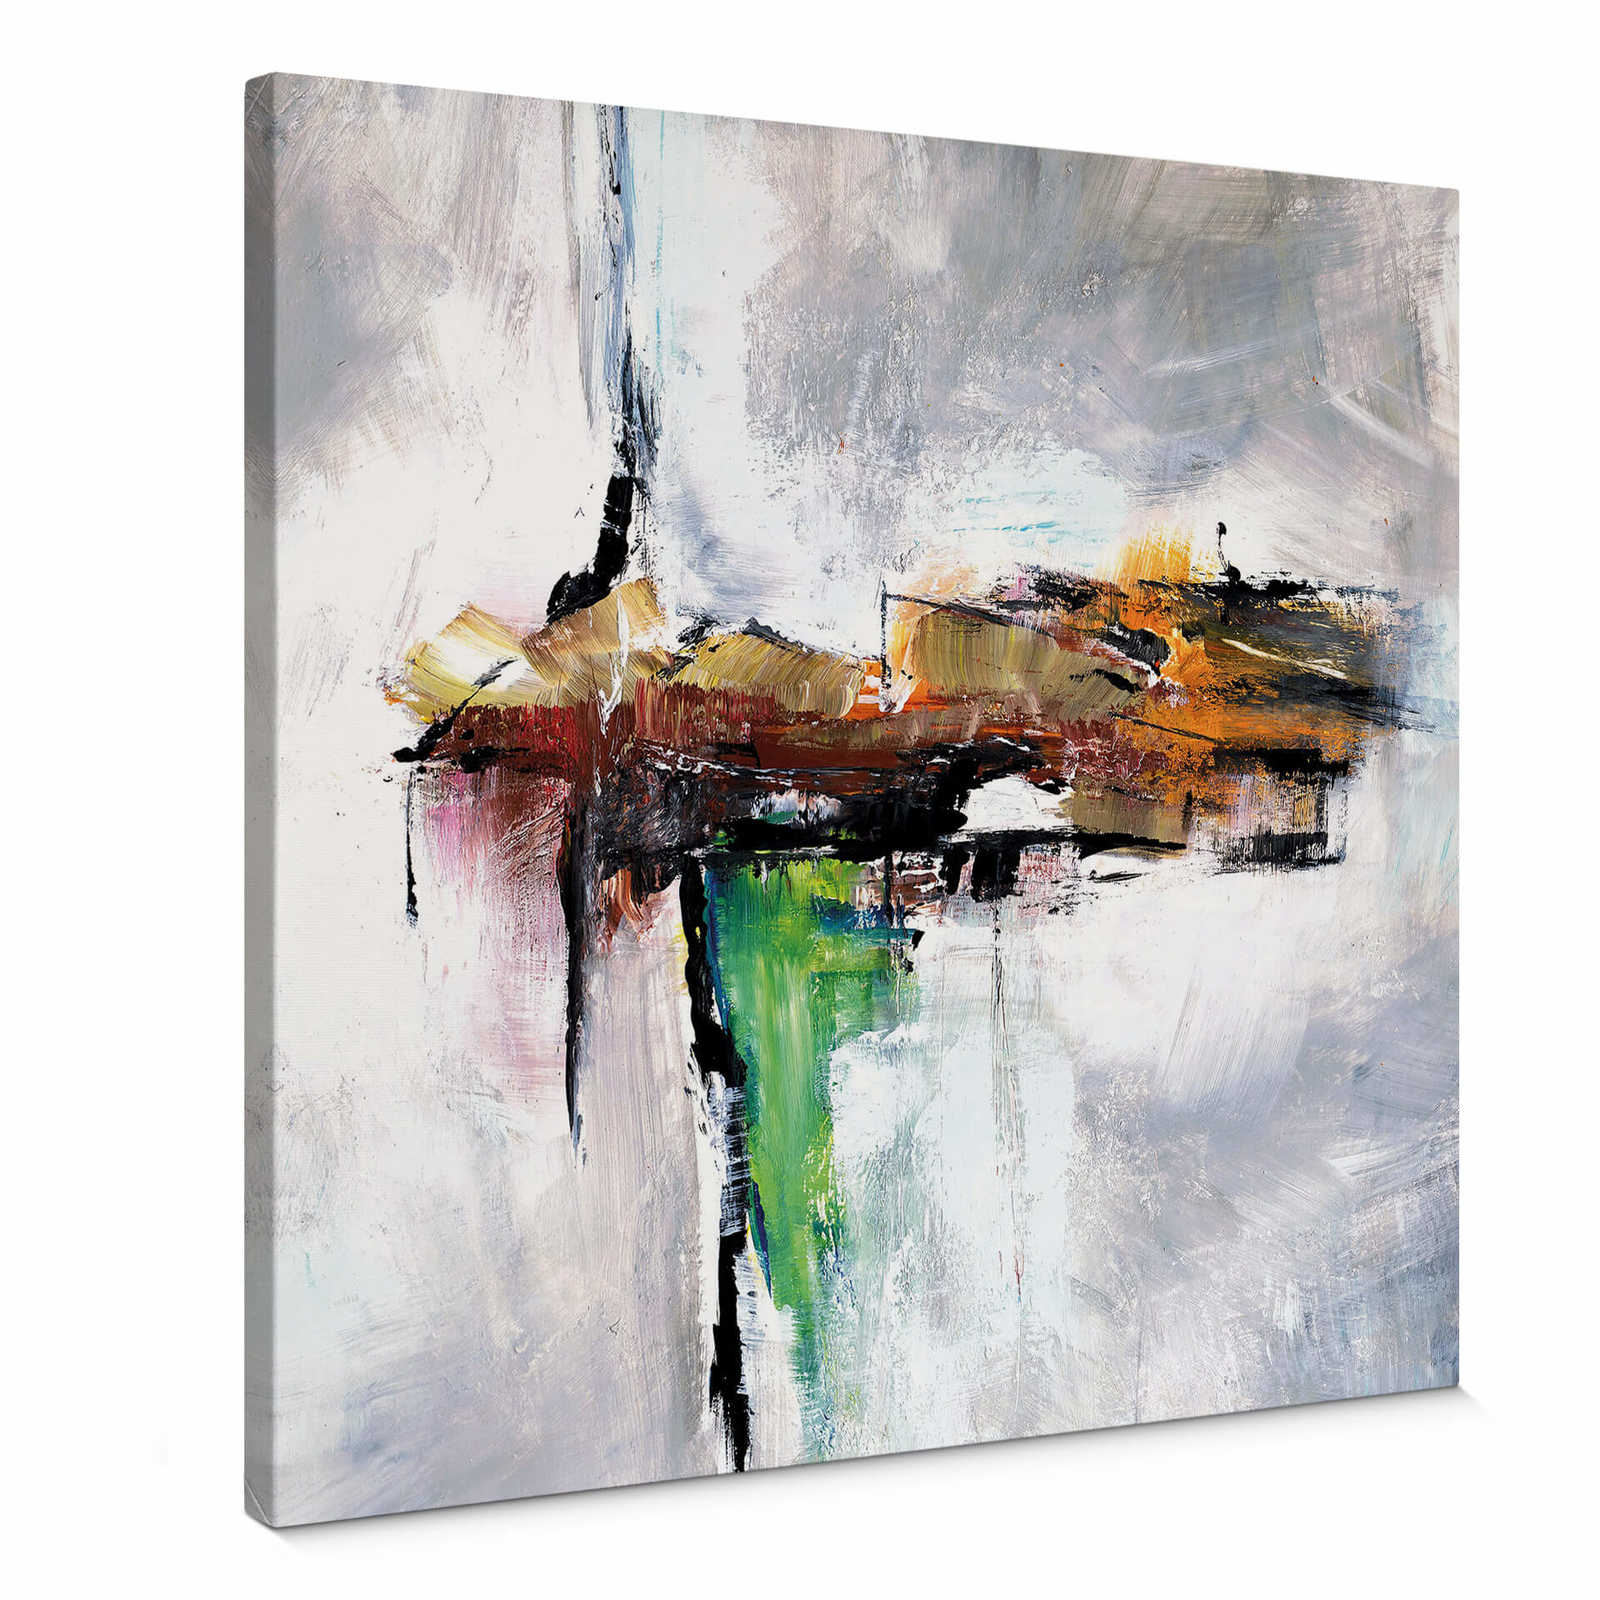         Square Canvas print abstract painting by Niksic
    